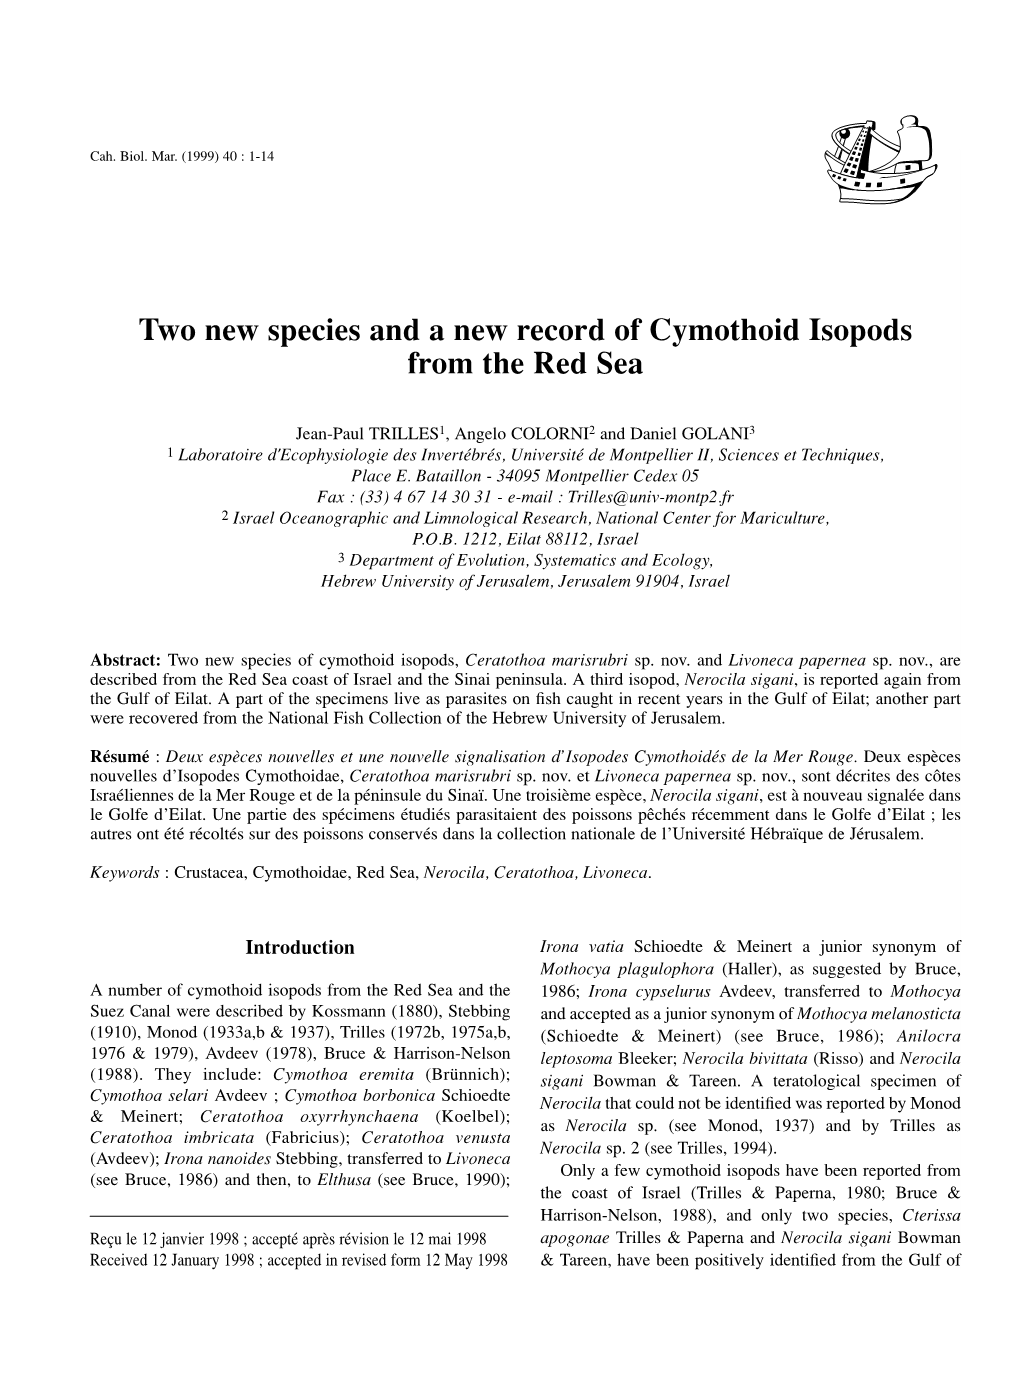 Two New Species and a New Record of Cymothoid Isopods from the Red Sea